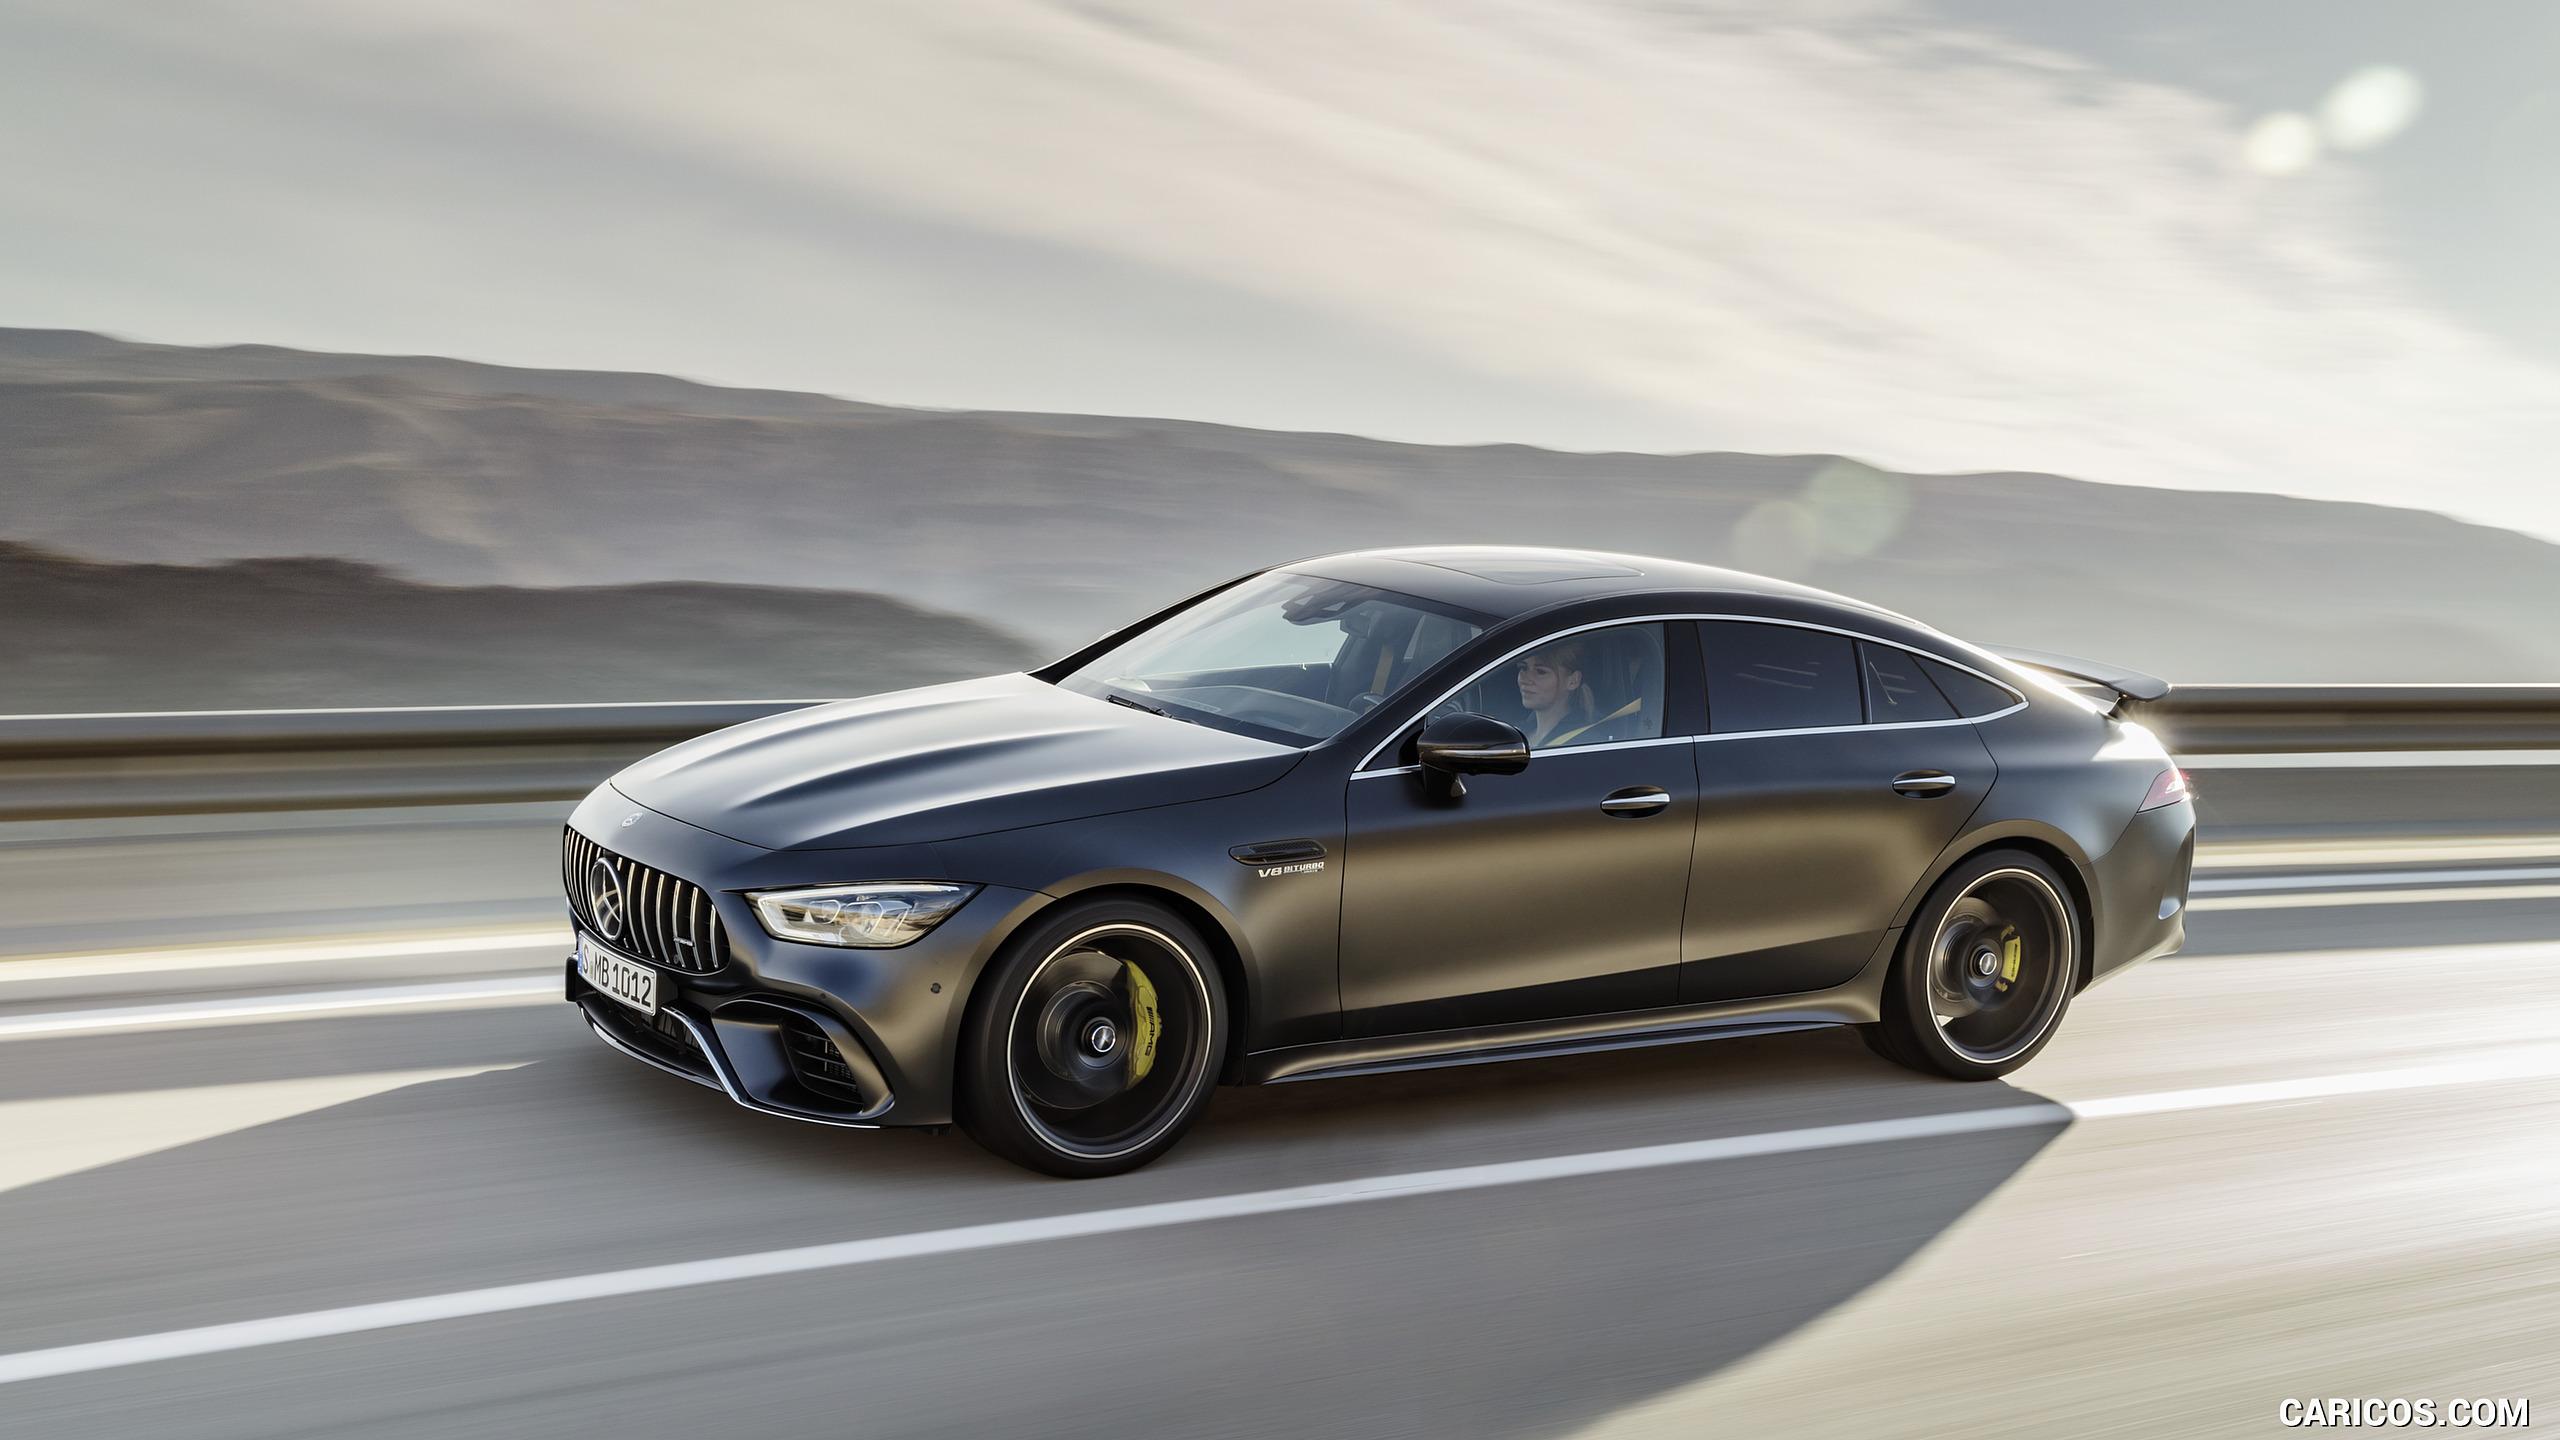 Mercedes AMG GT 63 S 4MATIC+ 4 Door Coupe Color